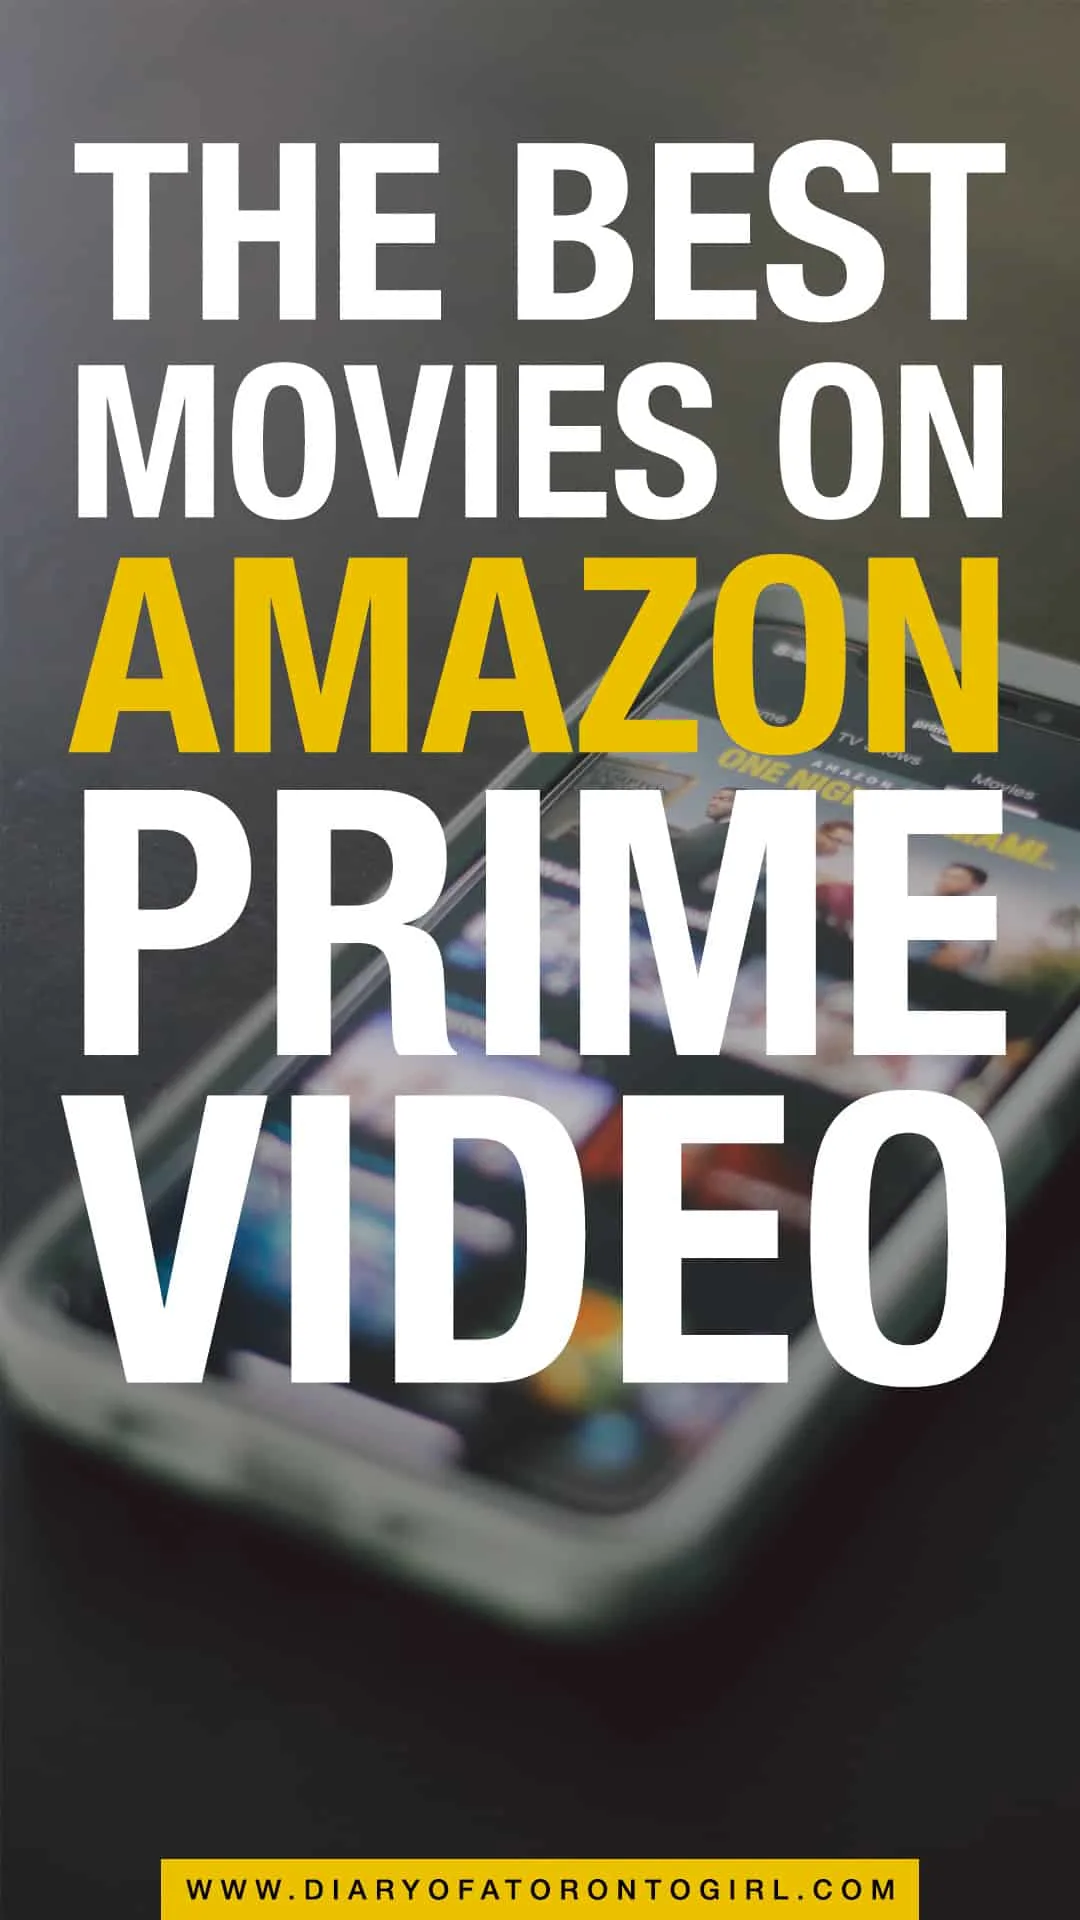 Looking for things to watch on Amazon Prime Video in Canada? Here are some of the best movies and films to binge-watch for my fellow Canadians, no matter what genres you're into!